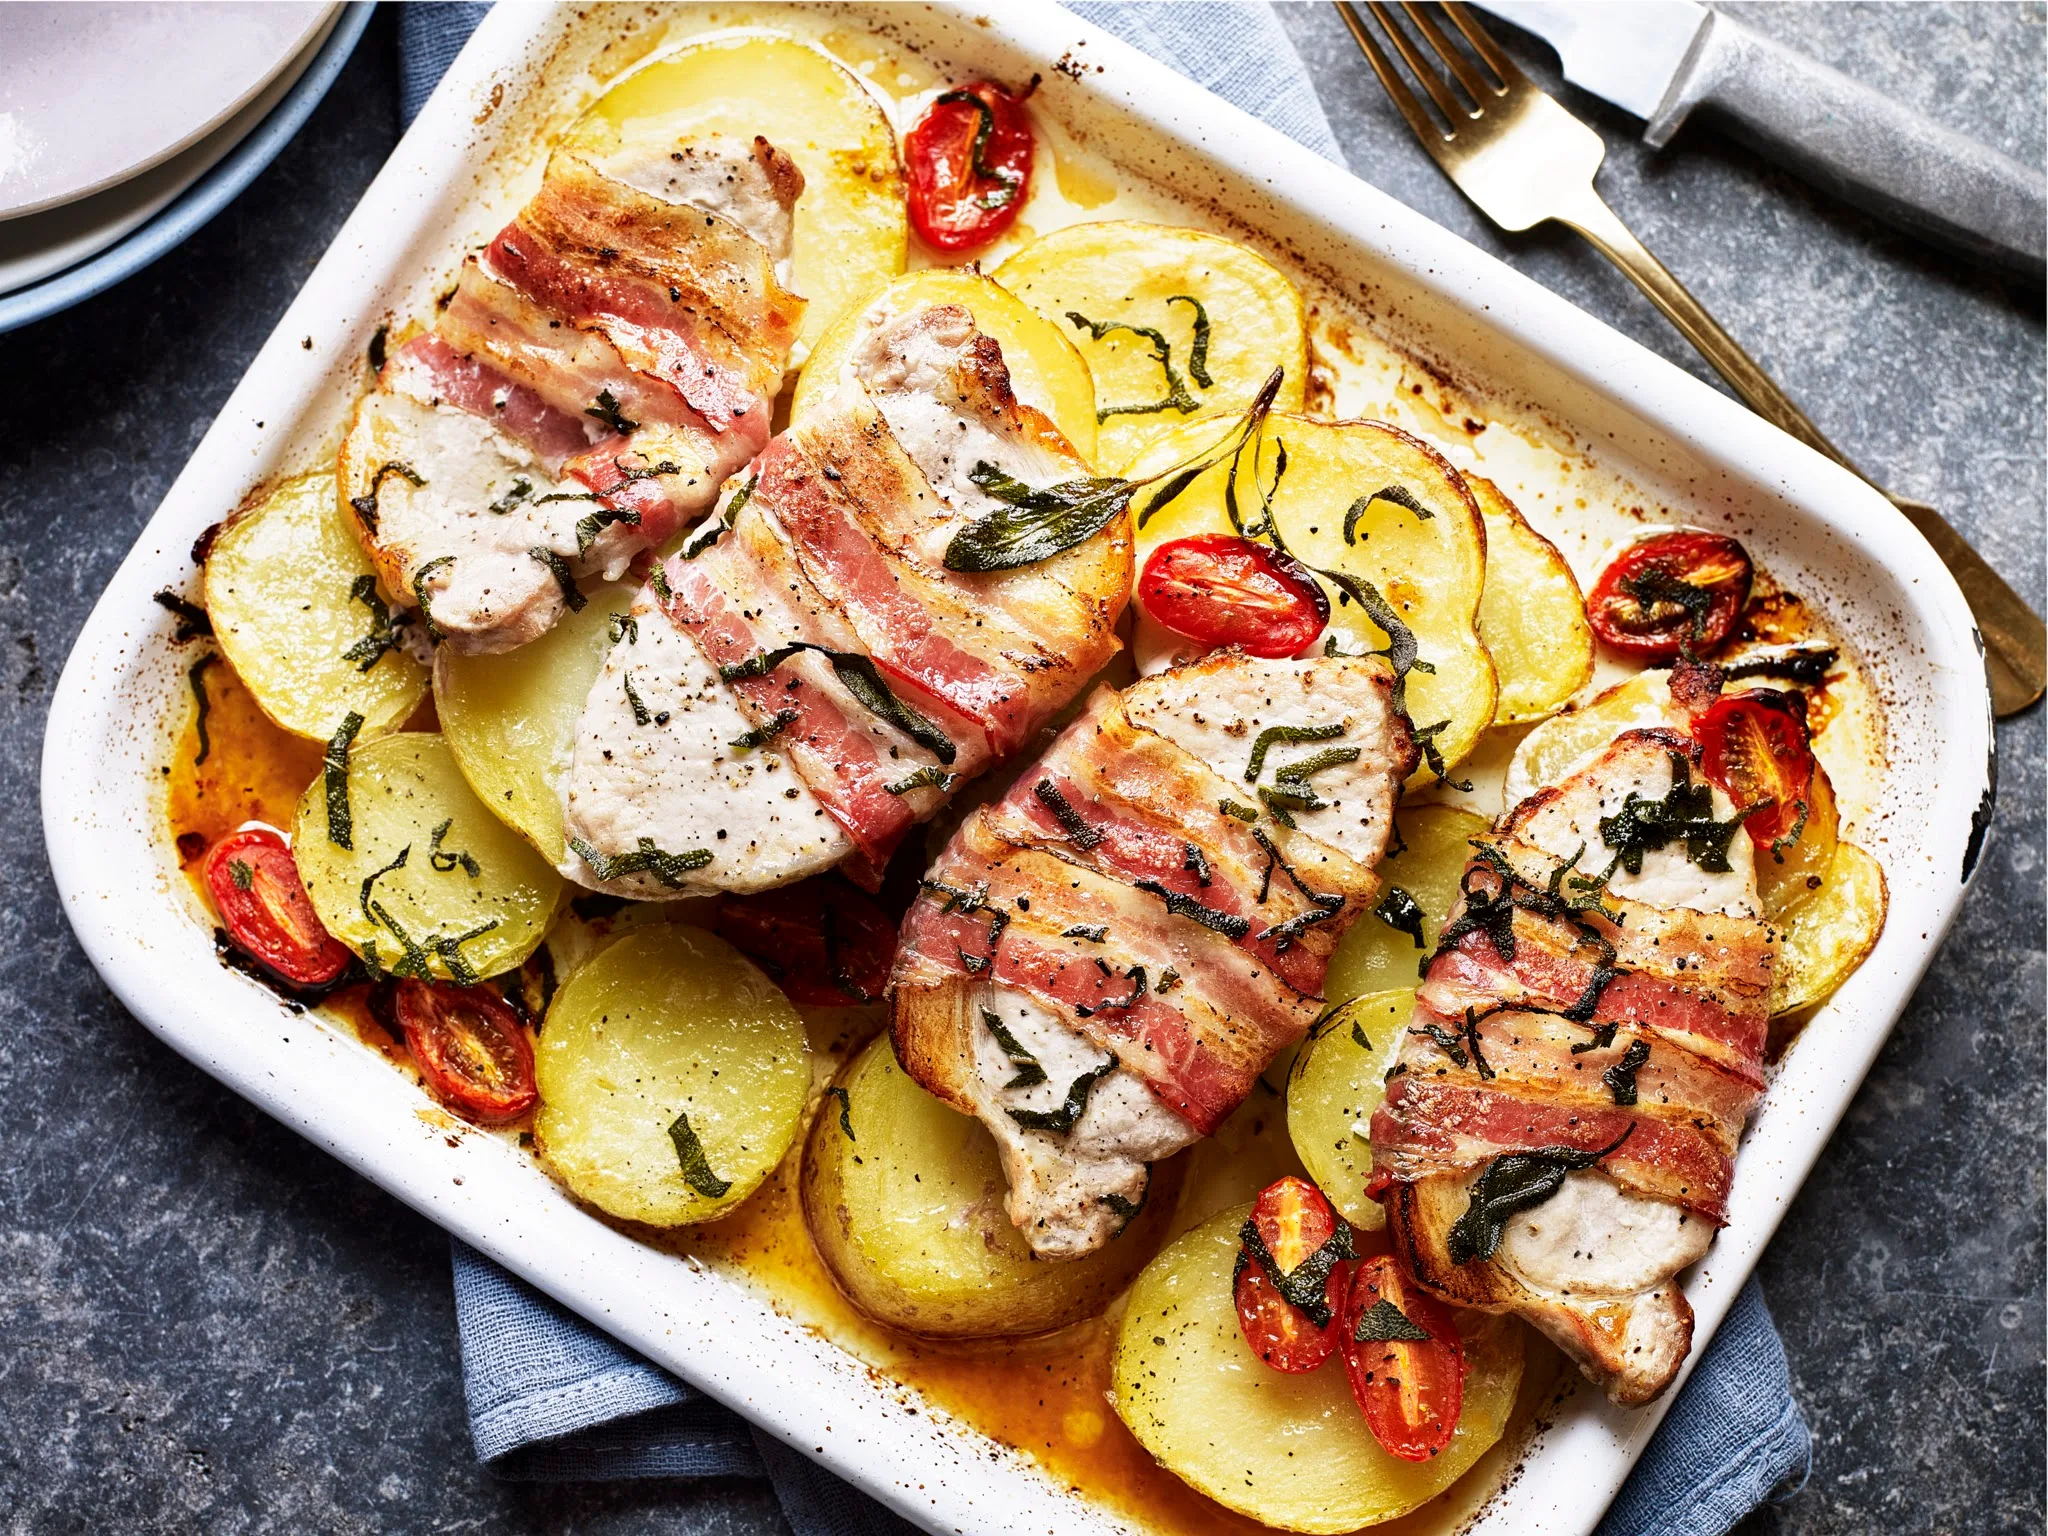 How To Make Tuscan Potatoes With Pork Loin Steaks And Pancetta: